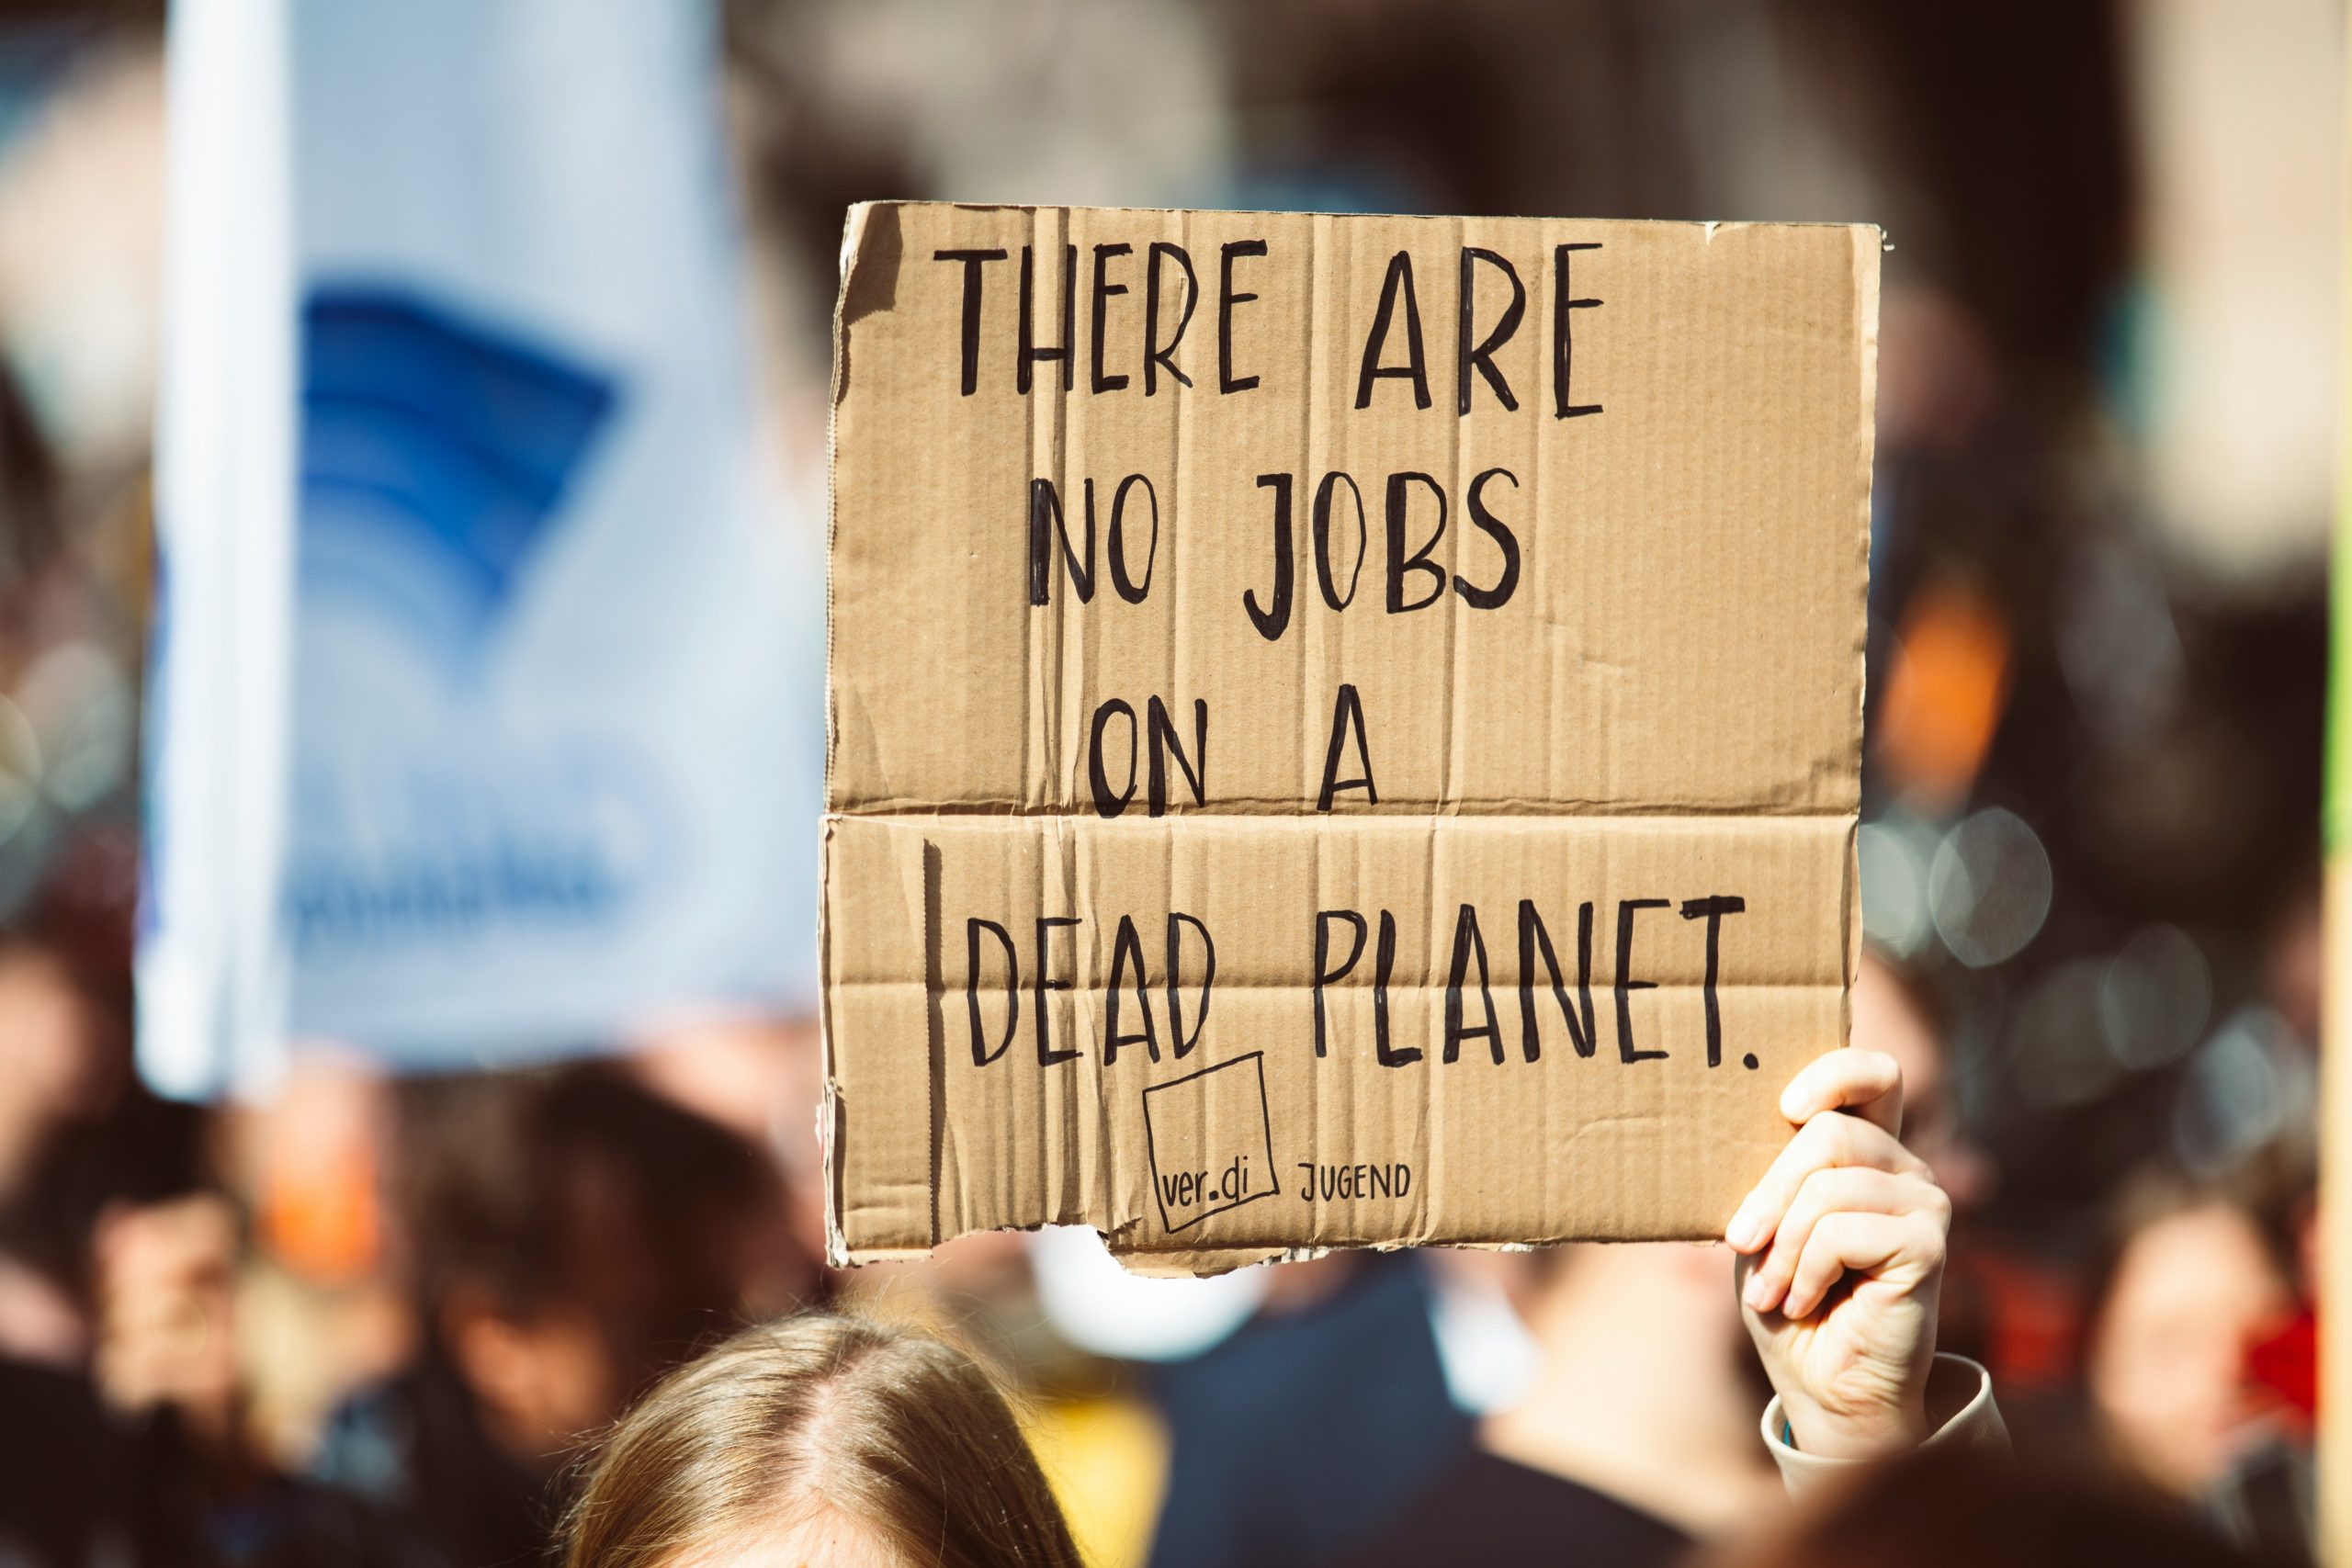 Protest sign that states "There are no jobs on a dead planet"